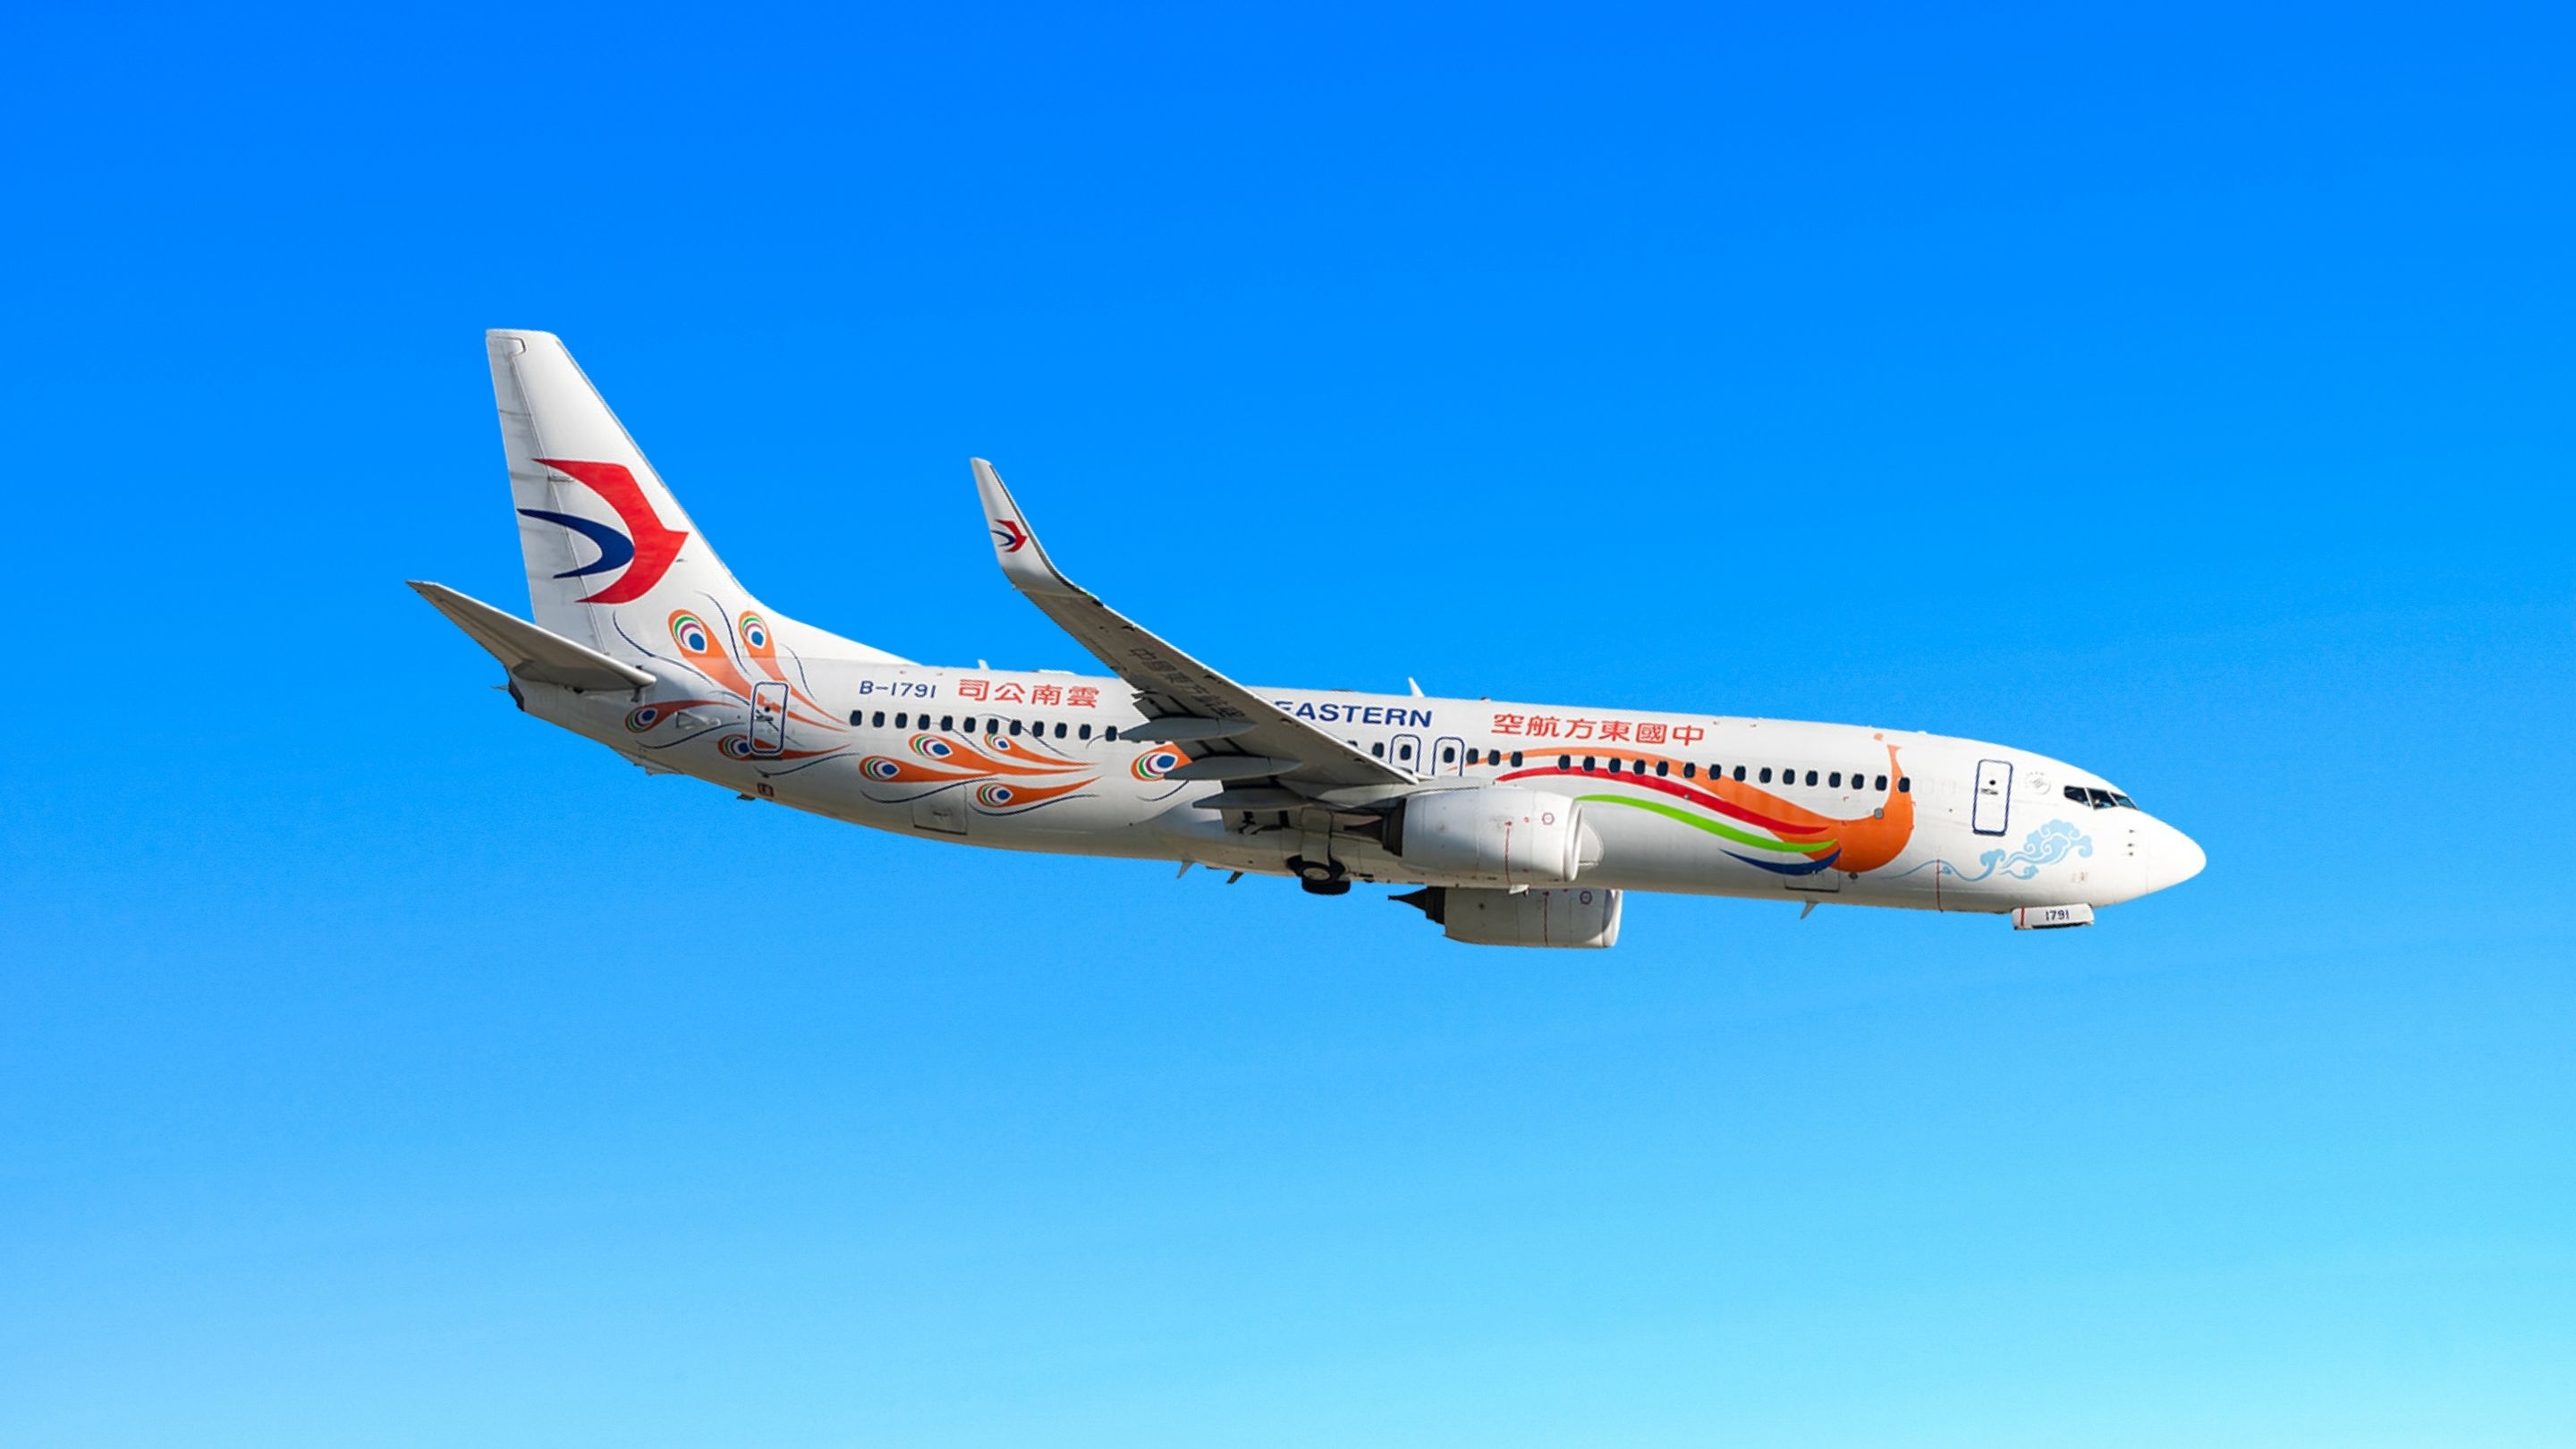 China  Eastern  Airlines  to  ground  it's  Fleet  of  102  Boeing  B737-800  aircraft  following  the  deadly  crash  on  Monday  !